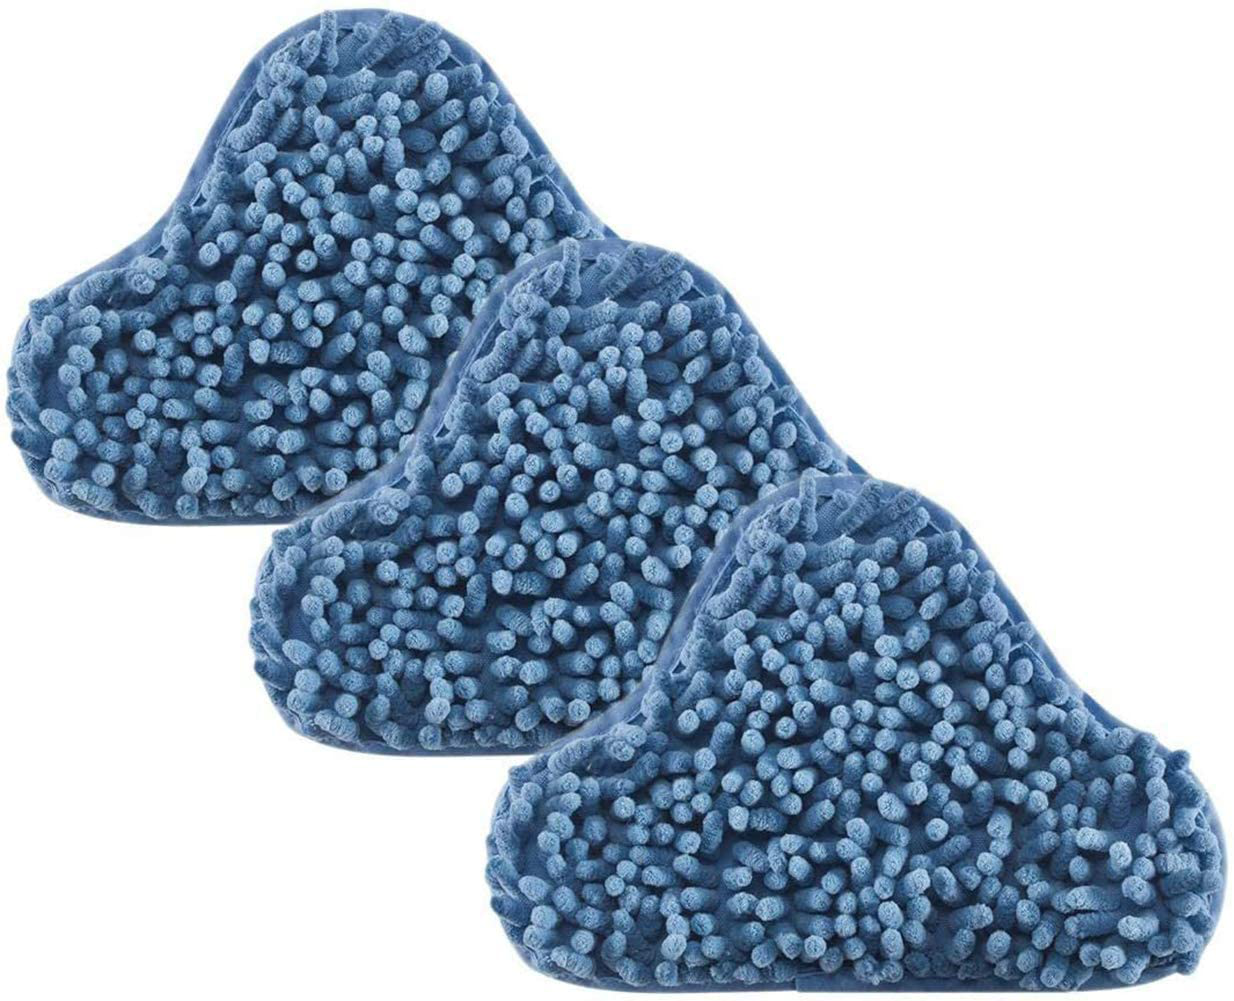 eoocvt 3pcs H2O Steam Mop X5 Pads Coral Blue Chenille Compatible for H20 Replacement Washable